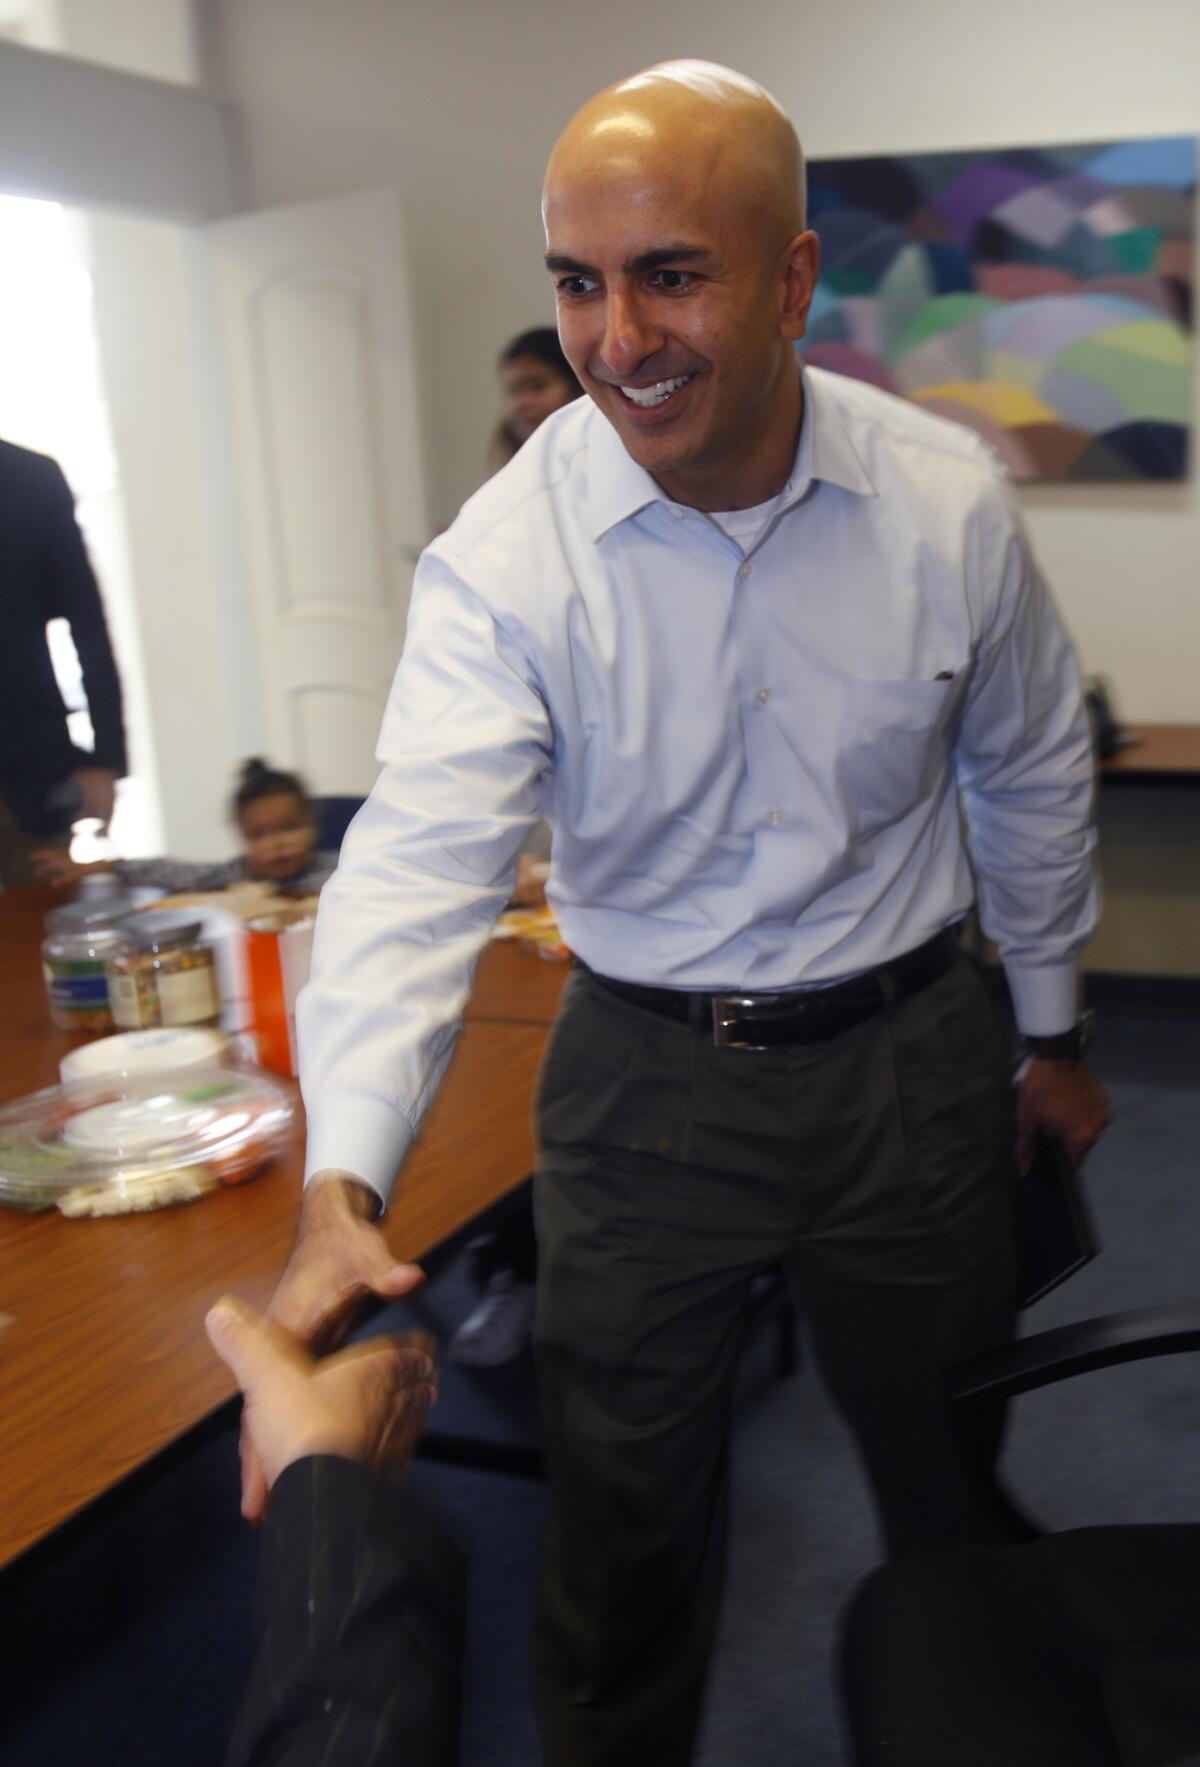 Neel Kashkari, a former U.S. Treasury official, says he would focus on long-term solutions to the state's water crisis if elected governor.